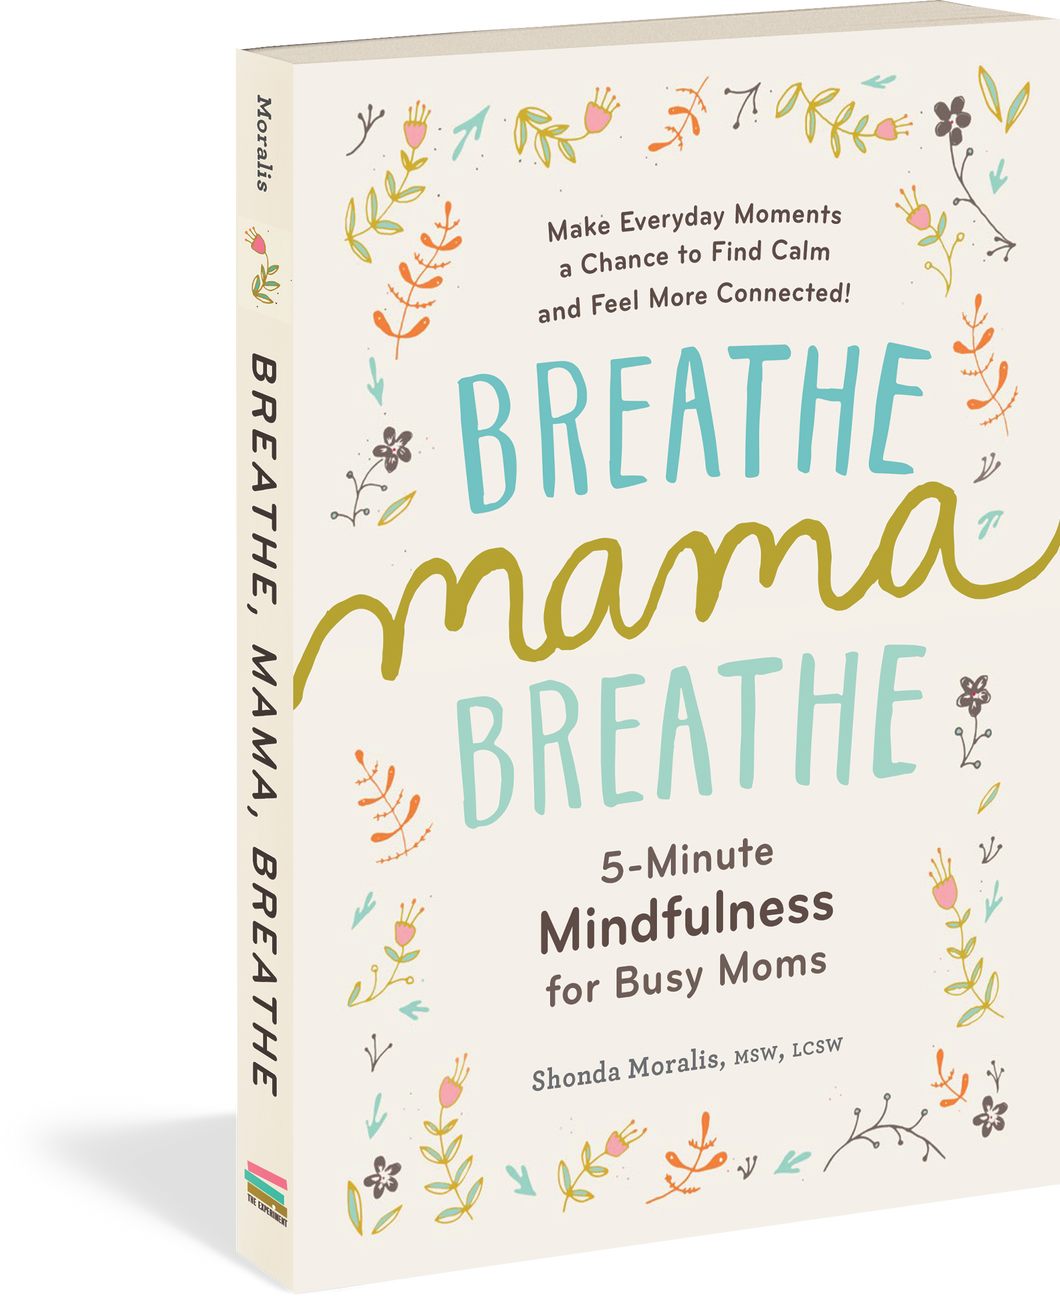 Breathe, Mama, Breathe 5-Minute Mindfulness for Busy Moms